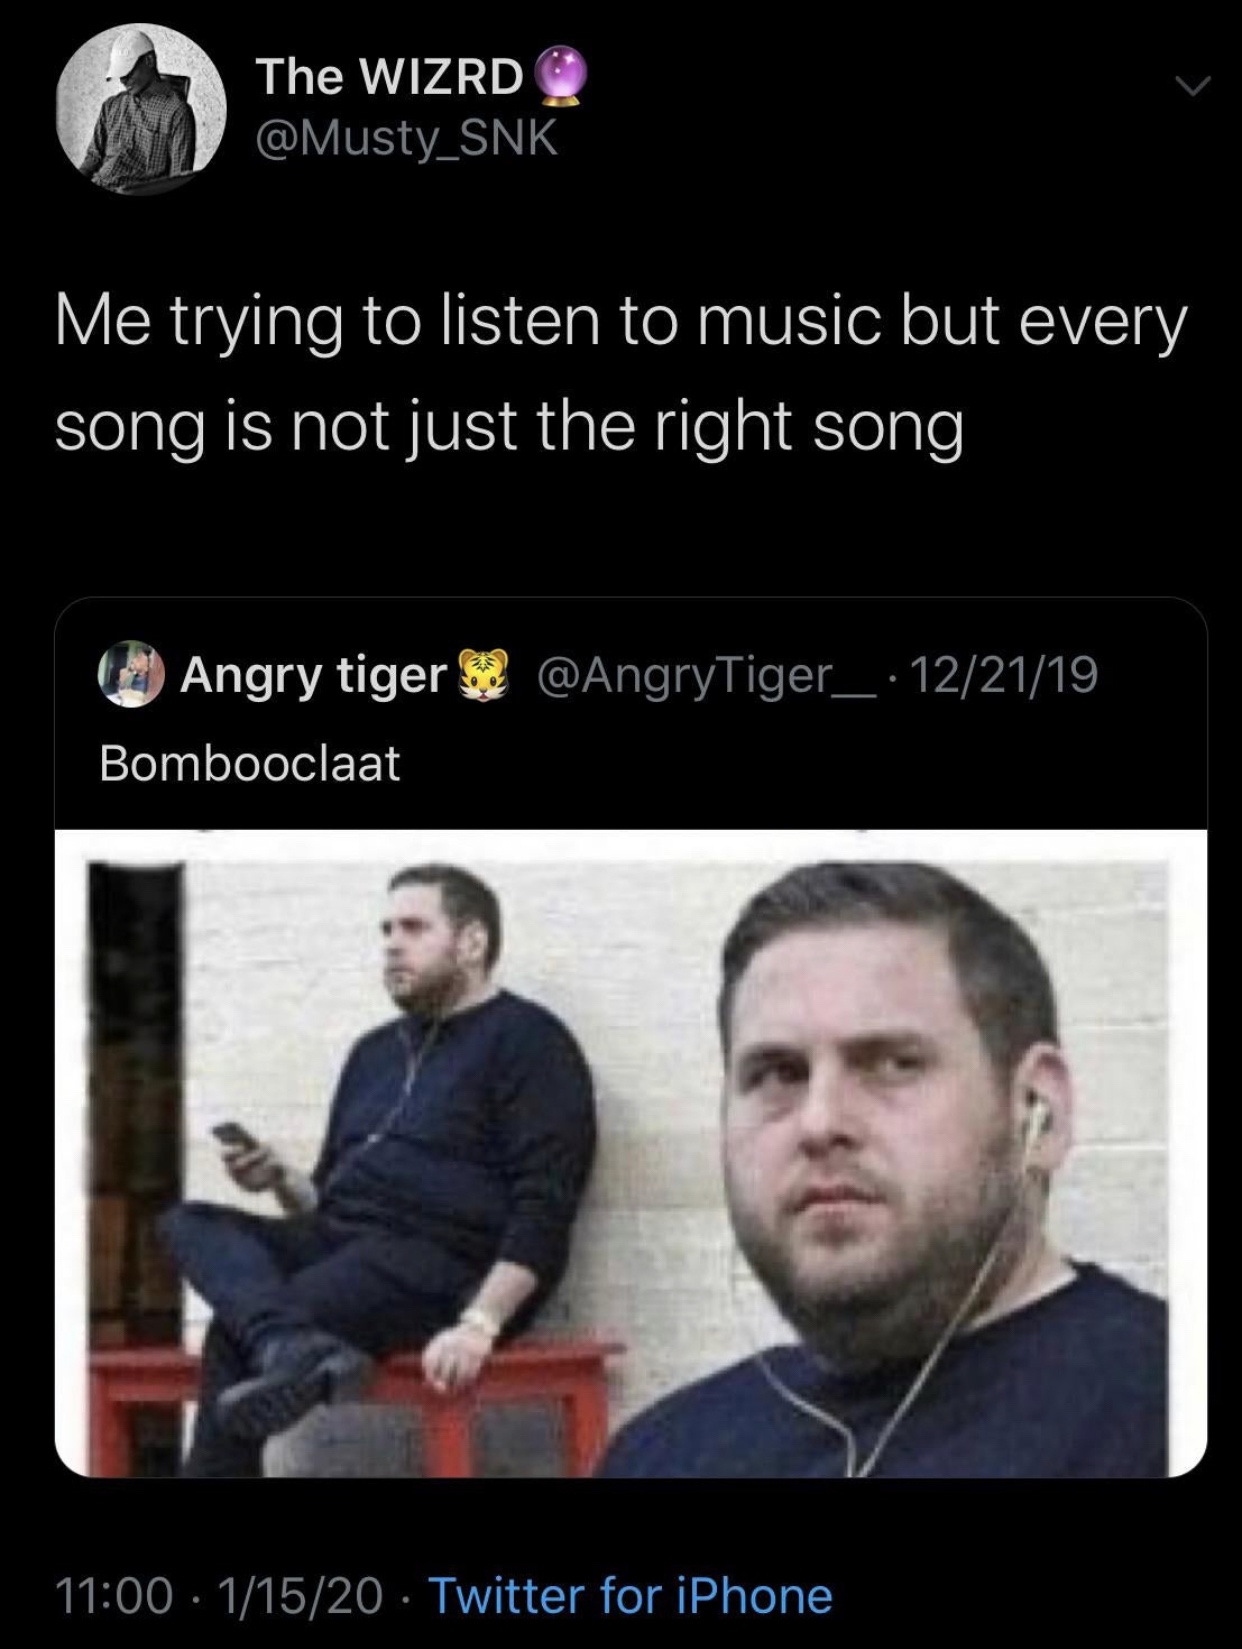 you pause the music but keep - The Wizrd Me trying to listen to music but every song is not just the right song 122119 Angry tiger Bombooclaat 11520 Twitter for iPhone